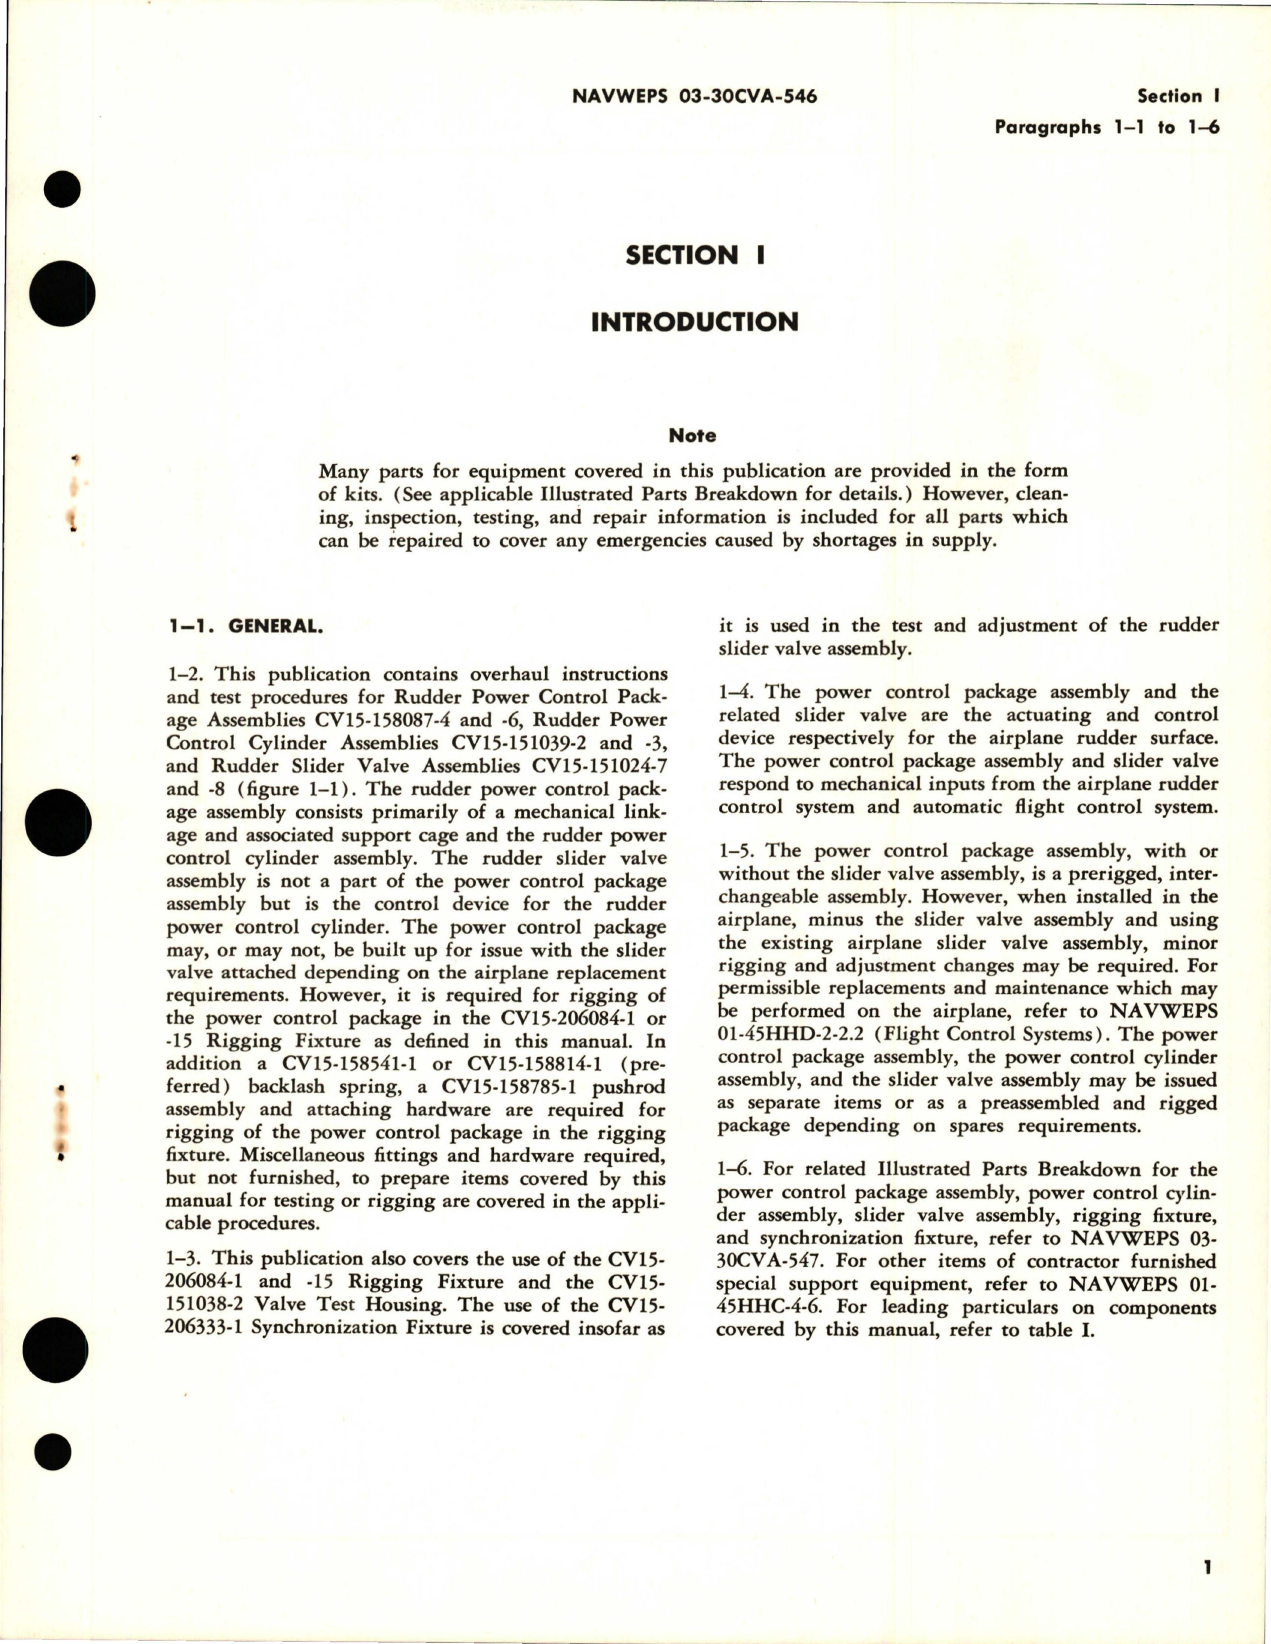 Sample page 5 from AirCorps Library document: Overhaul Instructions for Rudder Control, Cylinder Assy, Valve Assy, Rigging Fixtures, Synchronization Fixture